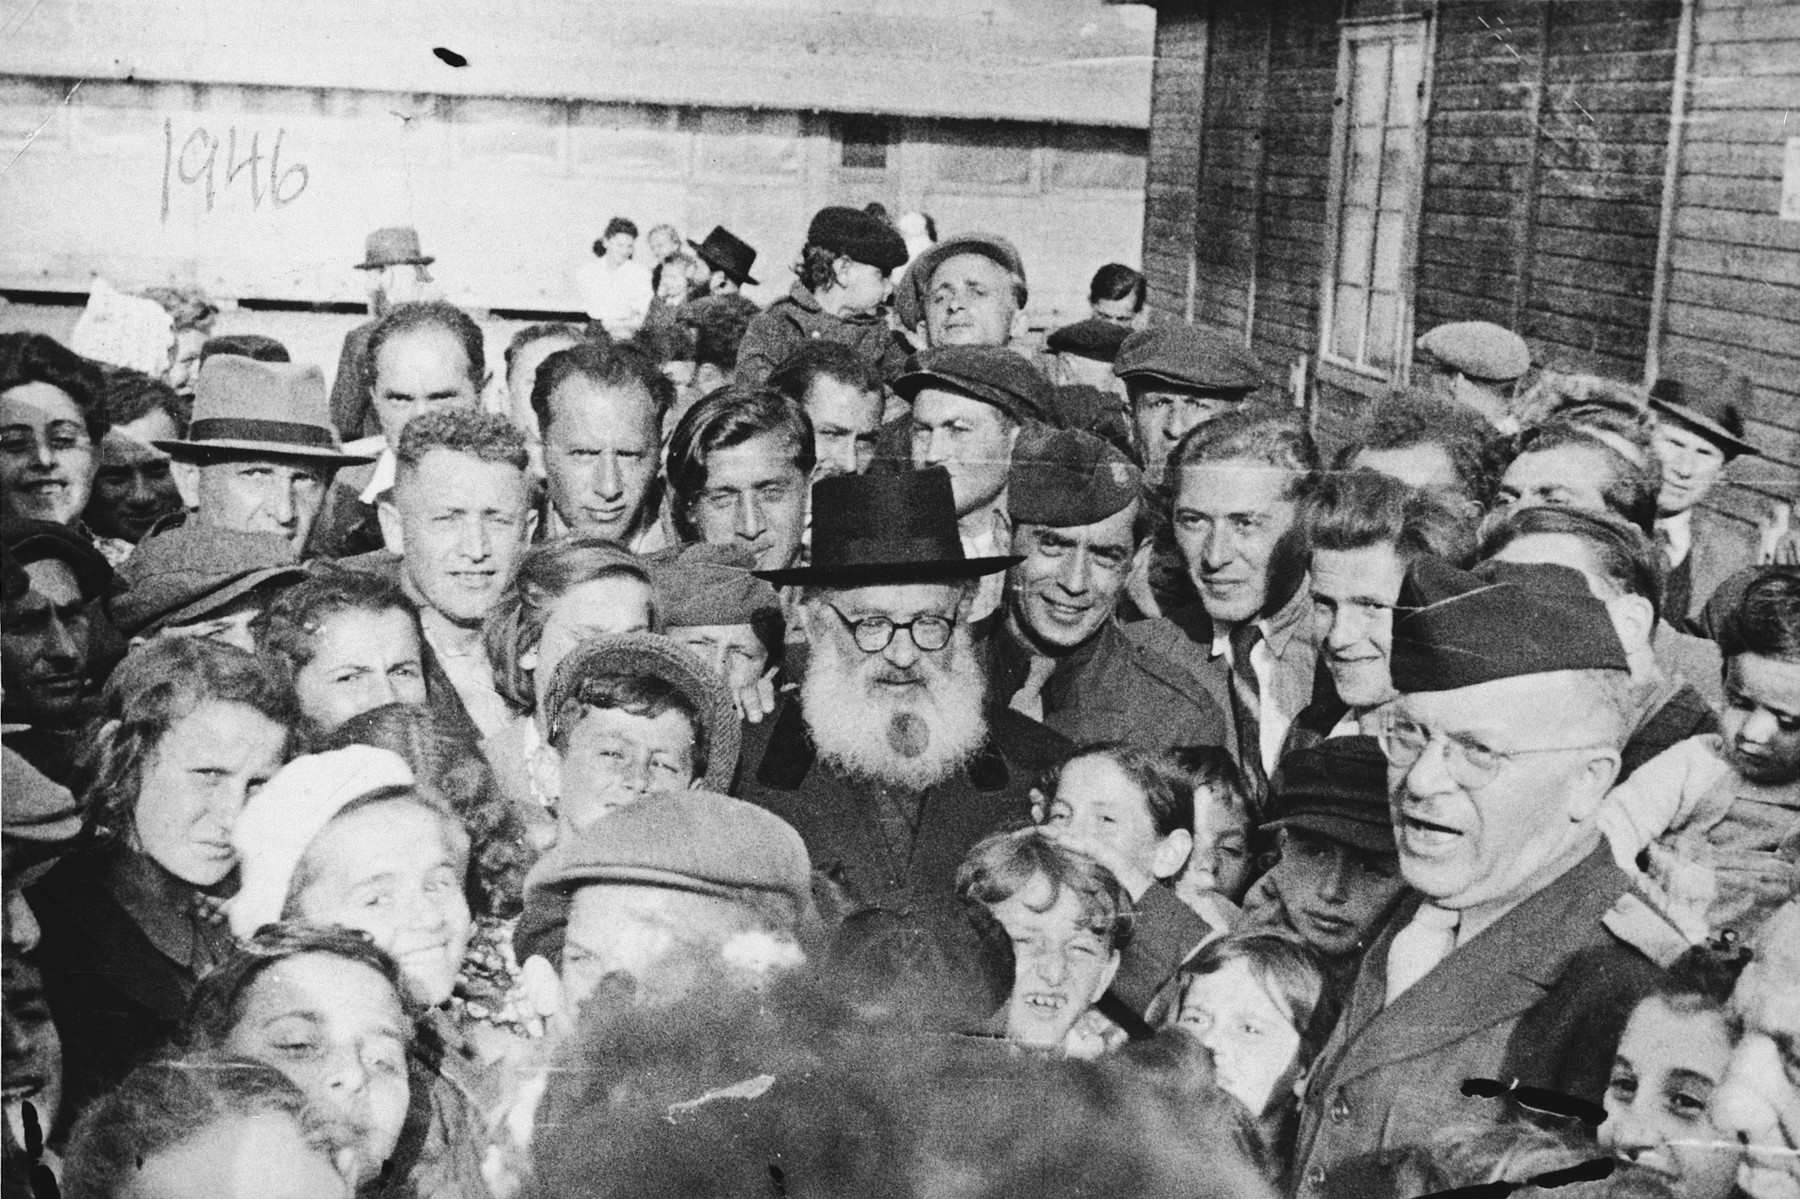 Rabbi Isaac Herzog pays an official visit to the Neu Freimann displaced person's camp.

Among the children crowded around him is Lova Warszawczyk.